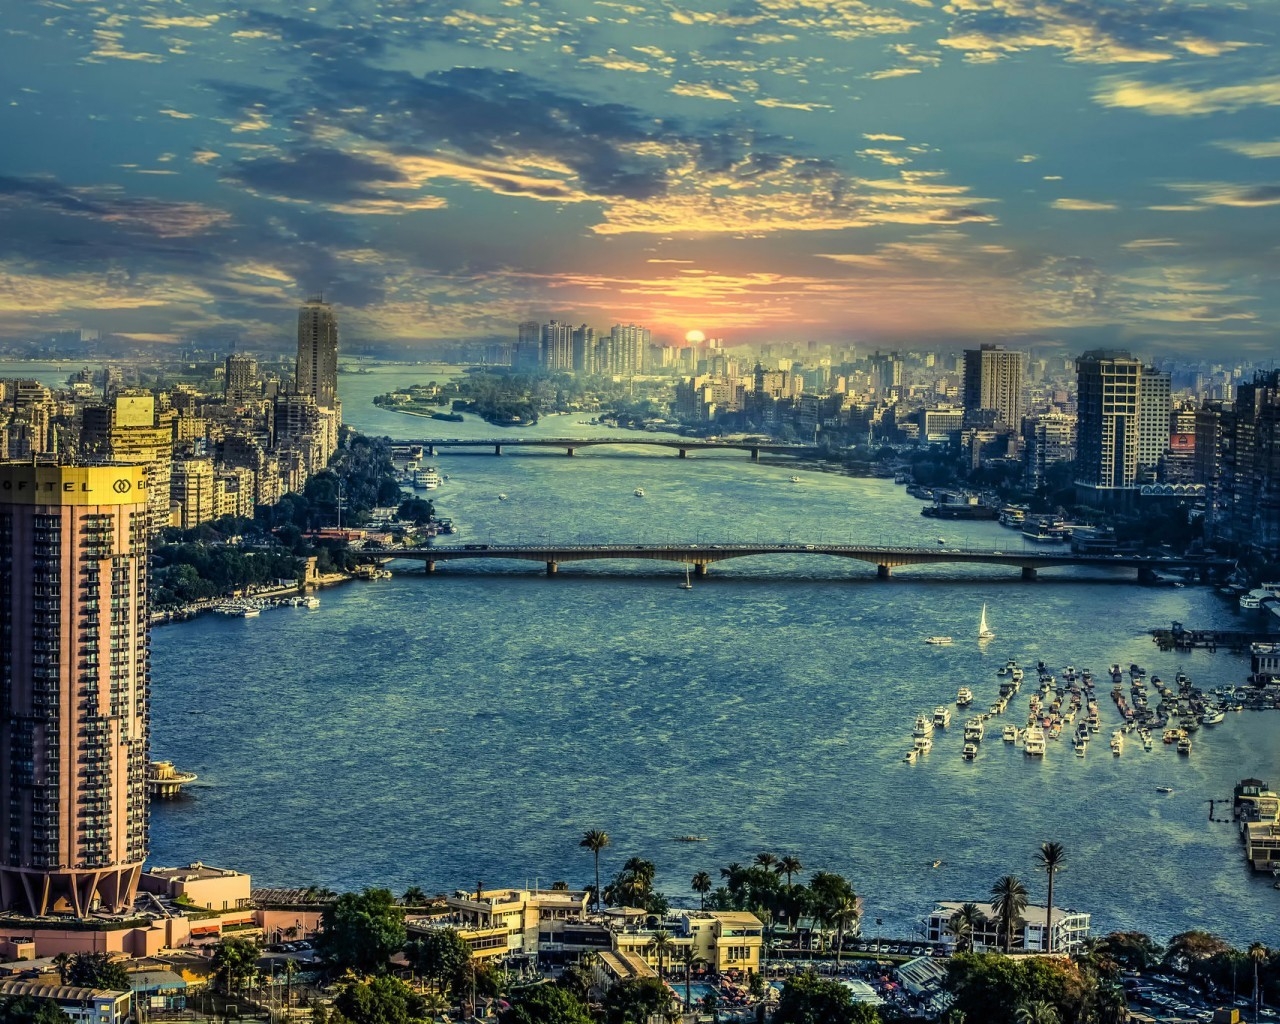 The River Nile in Cairo for 1280 x 1024 resolution